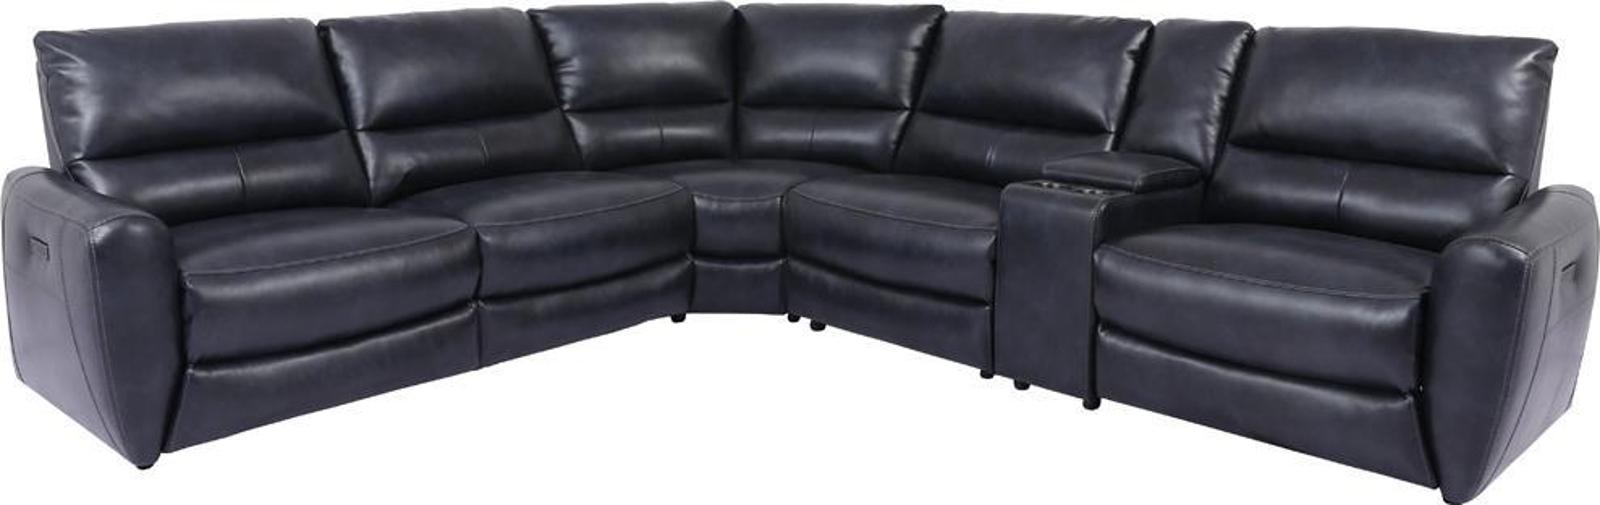 Parker House Samson Power Right Arm Facing Recliner in Banner Navy